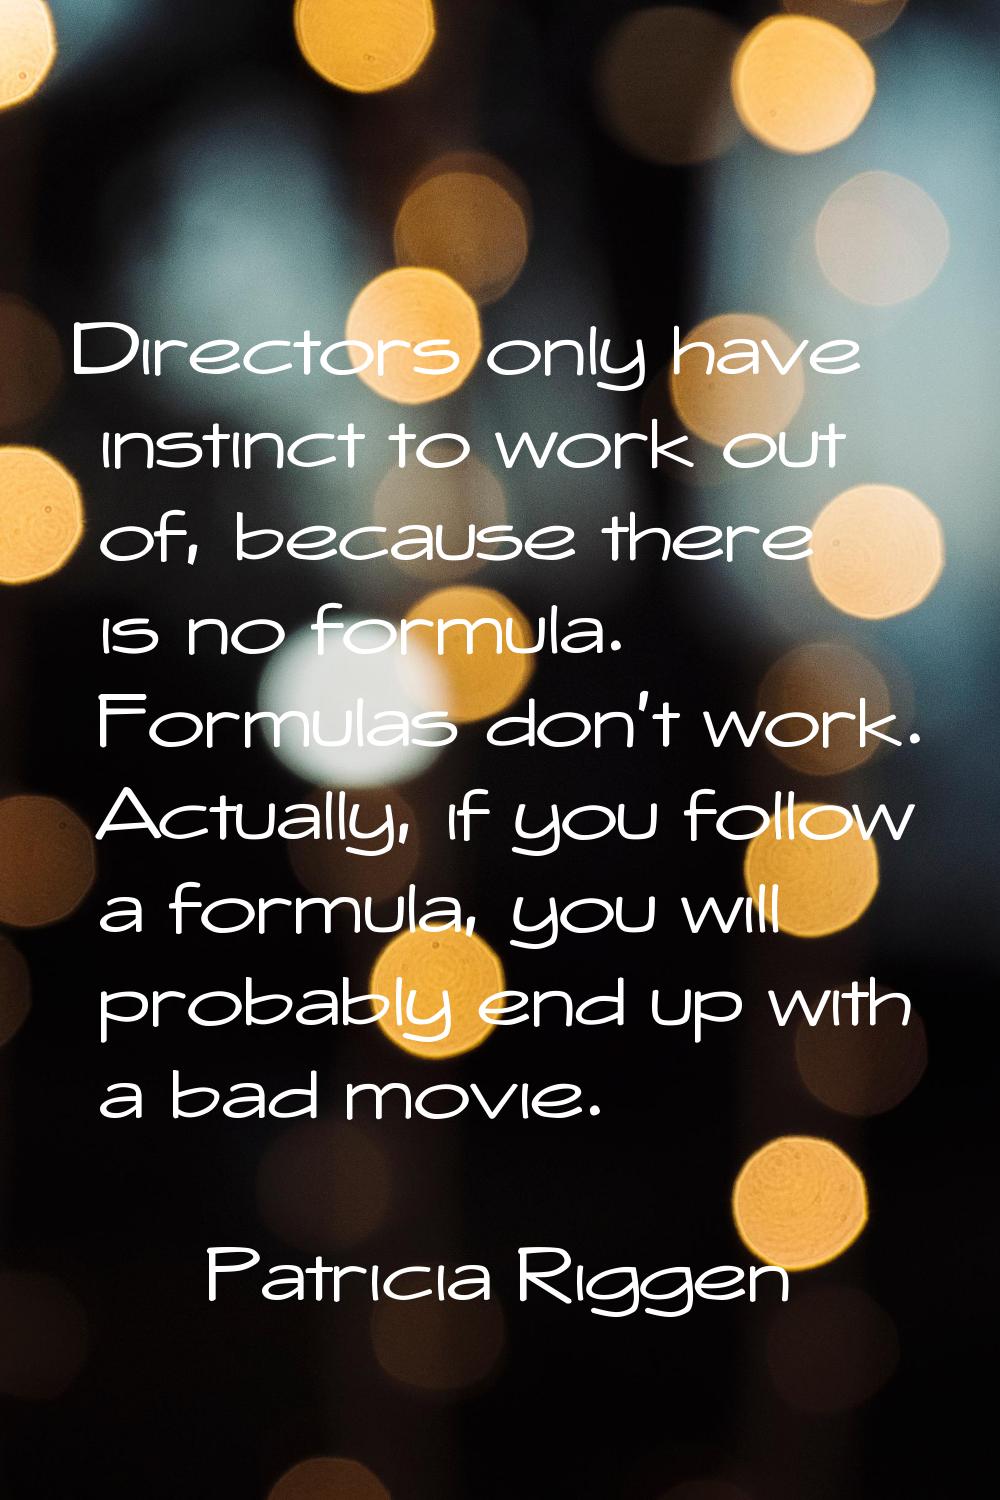 Directors only have instinct to work out of, because there is no formula. Formulas don't work. Actu